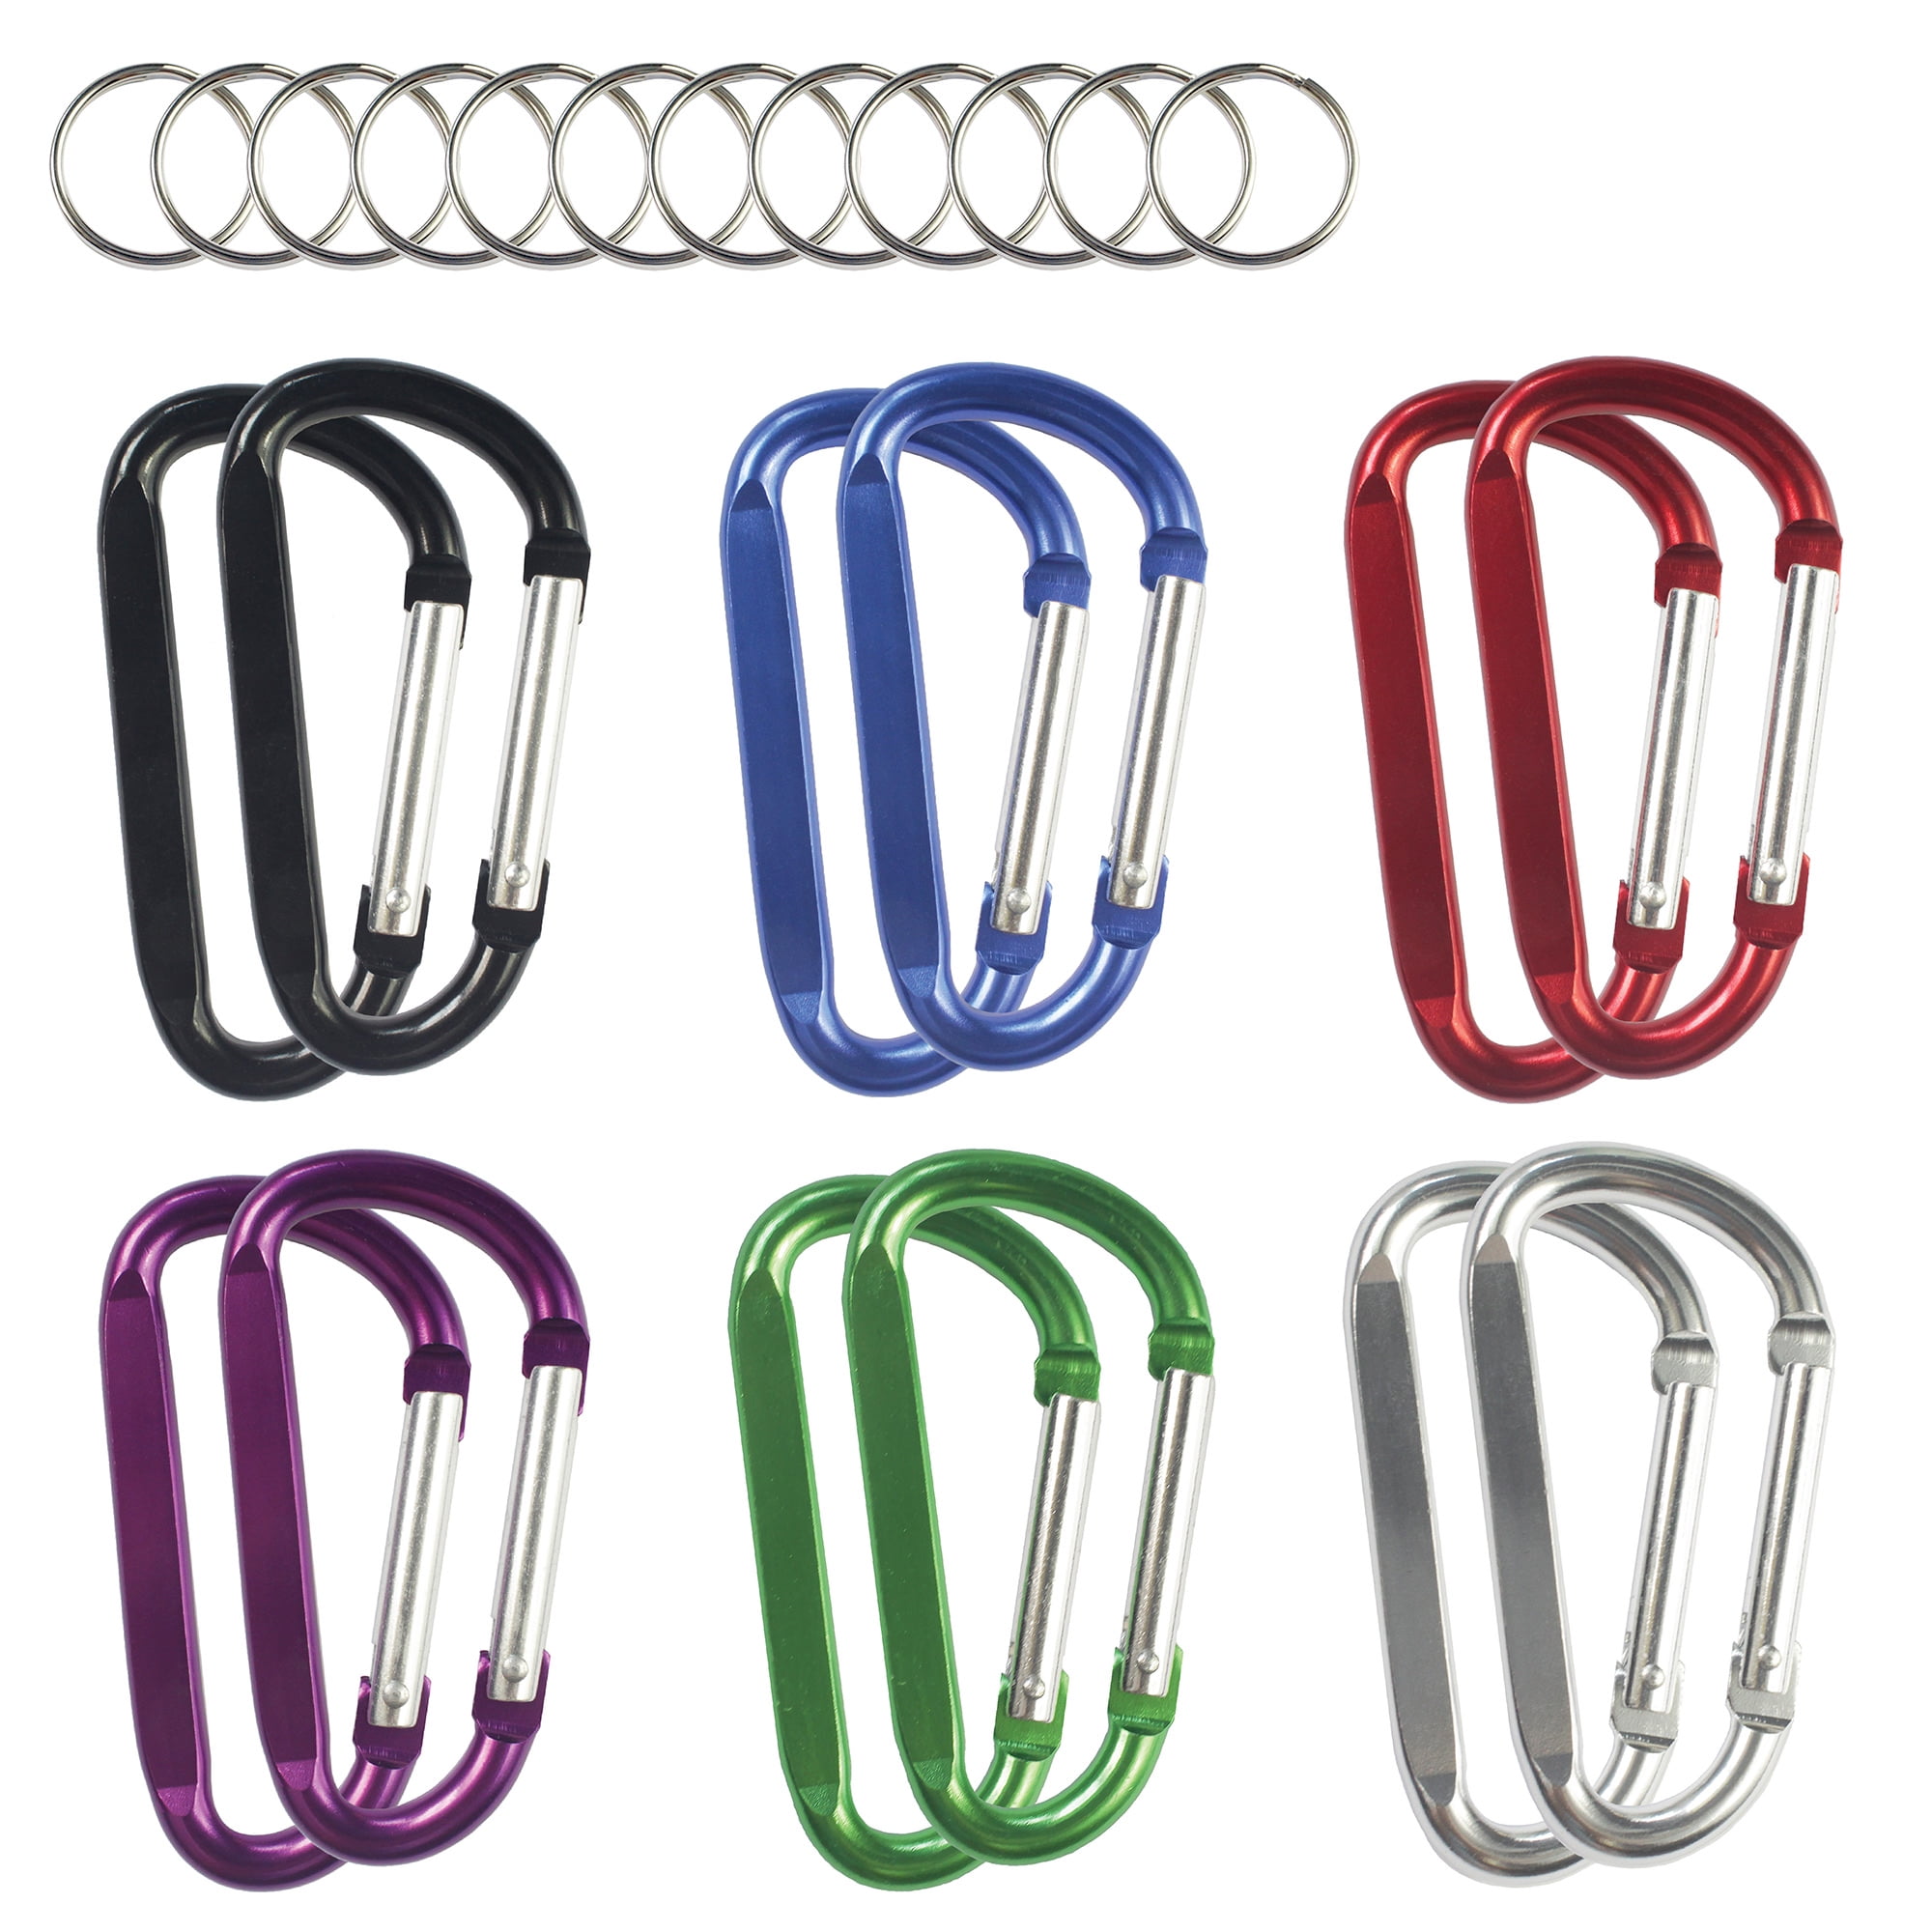 12pcs 3” Aluminium Carabiner Clip Vibrant Colors, Durable Spring-loaded  Gate Keychain Hook Pear Shape for Home, RV, Camping, Hiking, Fishing or